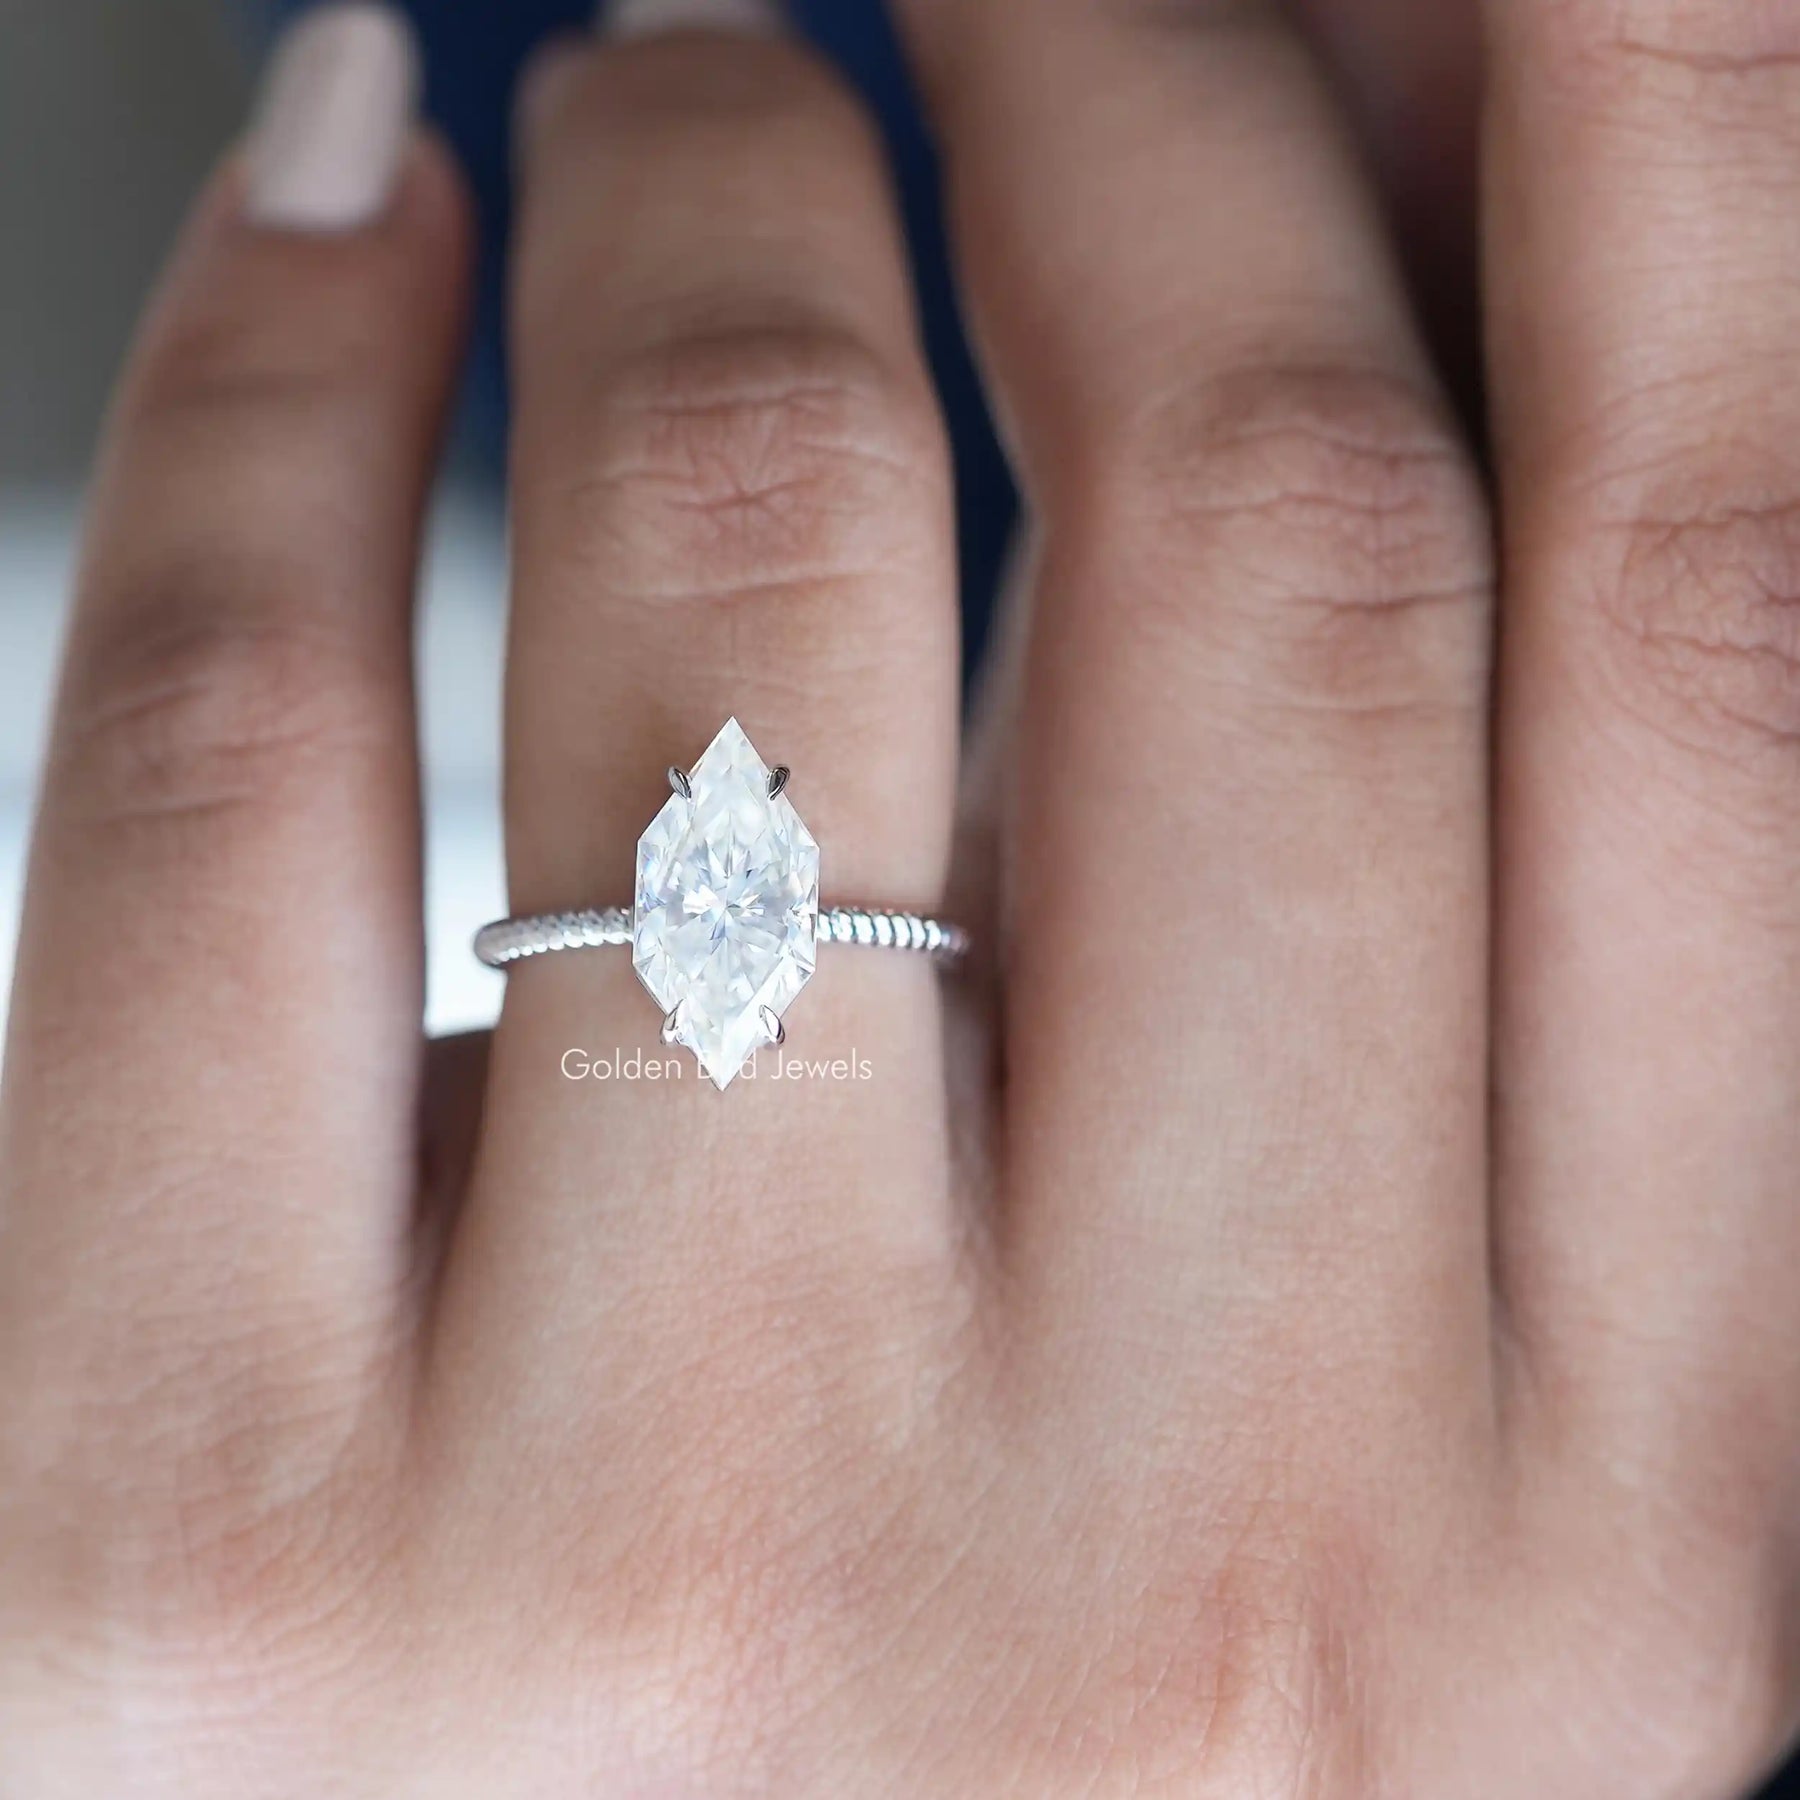 [Dutch marquise engagement ring made in 18k white gold]-[Golden Bird Jewels]